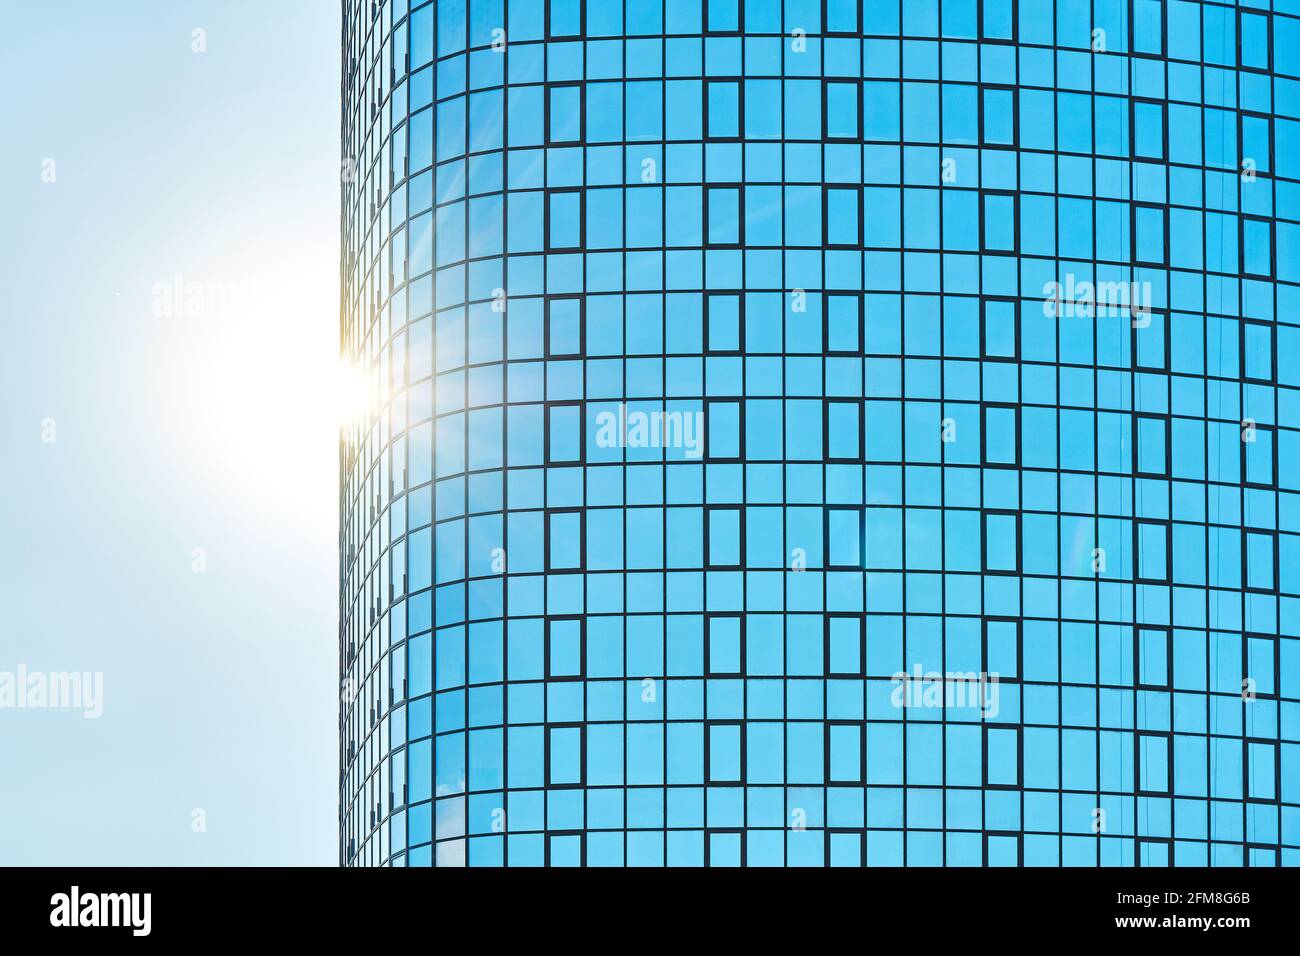 Stylish highrise office building with shiny blue glass facade reflecting bright sunlight against clear blue sky on sunny day Stock Photo